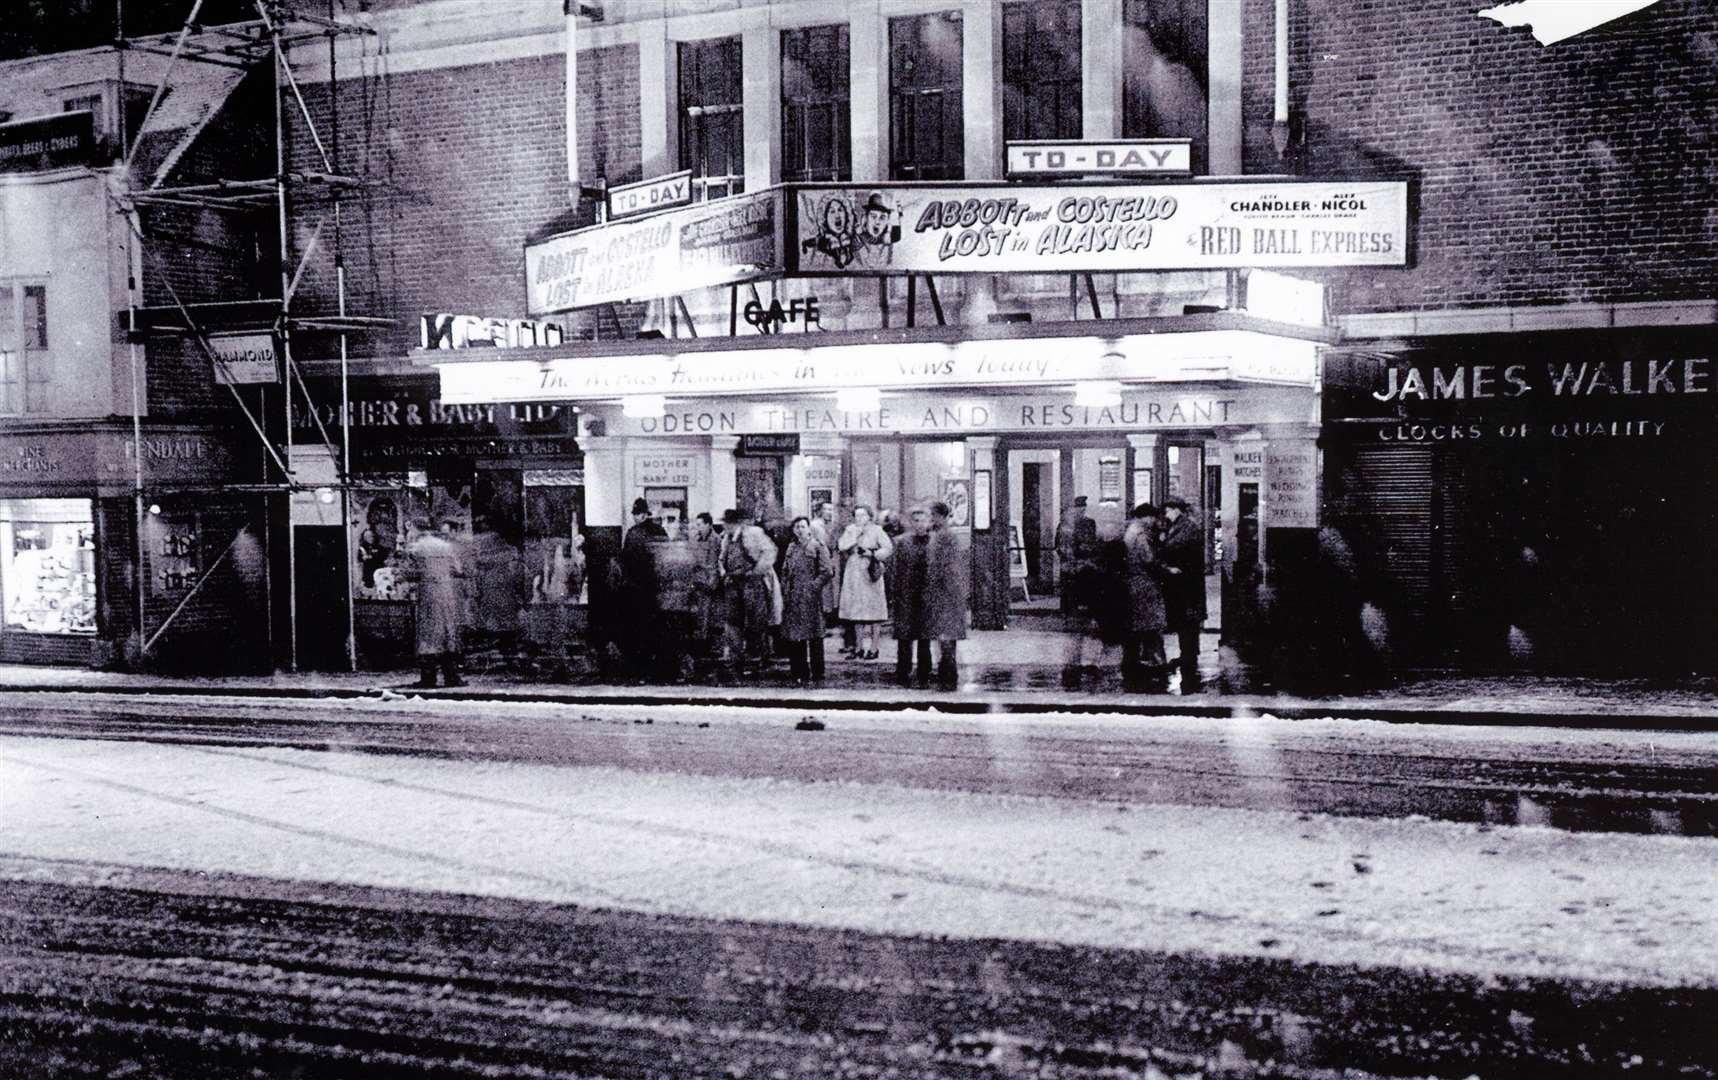 The high street was a bleak place during this blizzard but queues still formed for the latest show at the Odeon. Picture: Countrywide Photographic